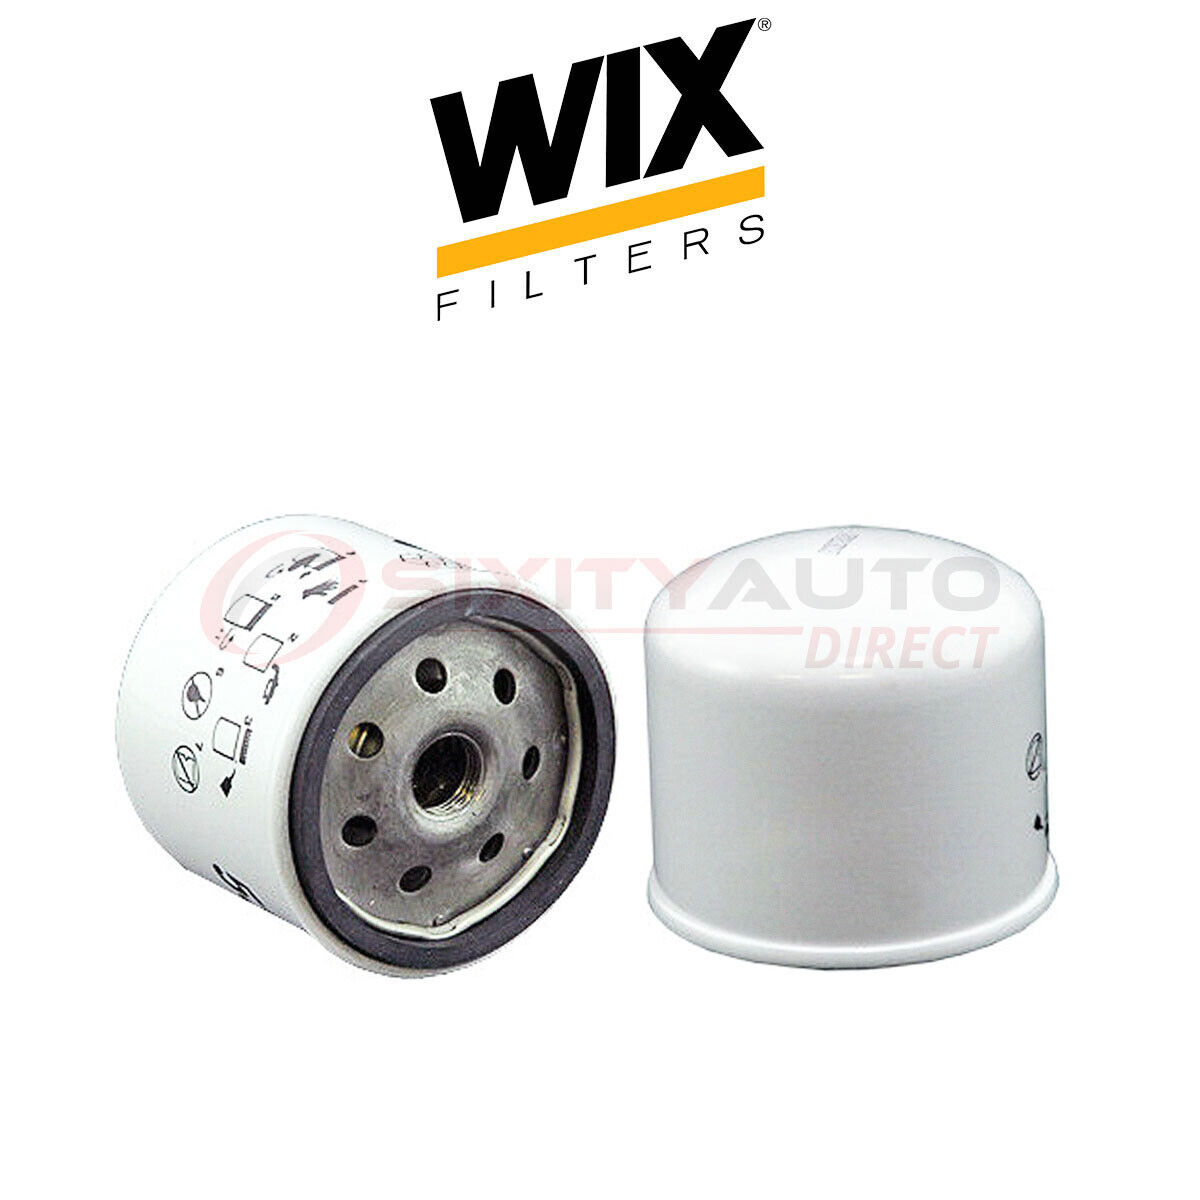 WIX 33612 Fuel Filter for Gas Filtration System zk